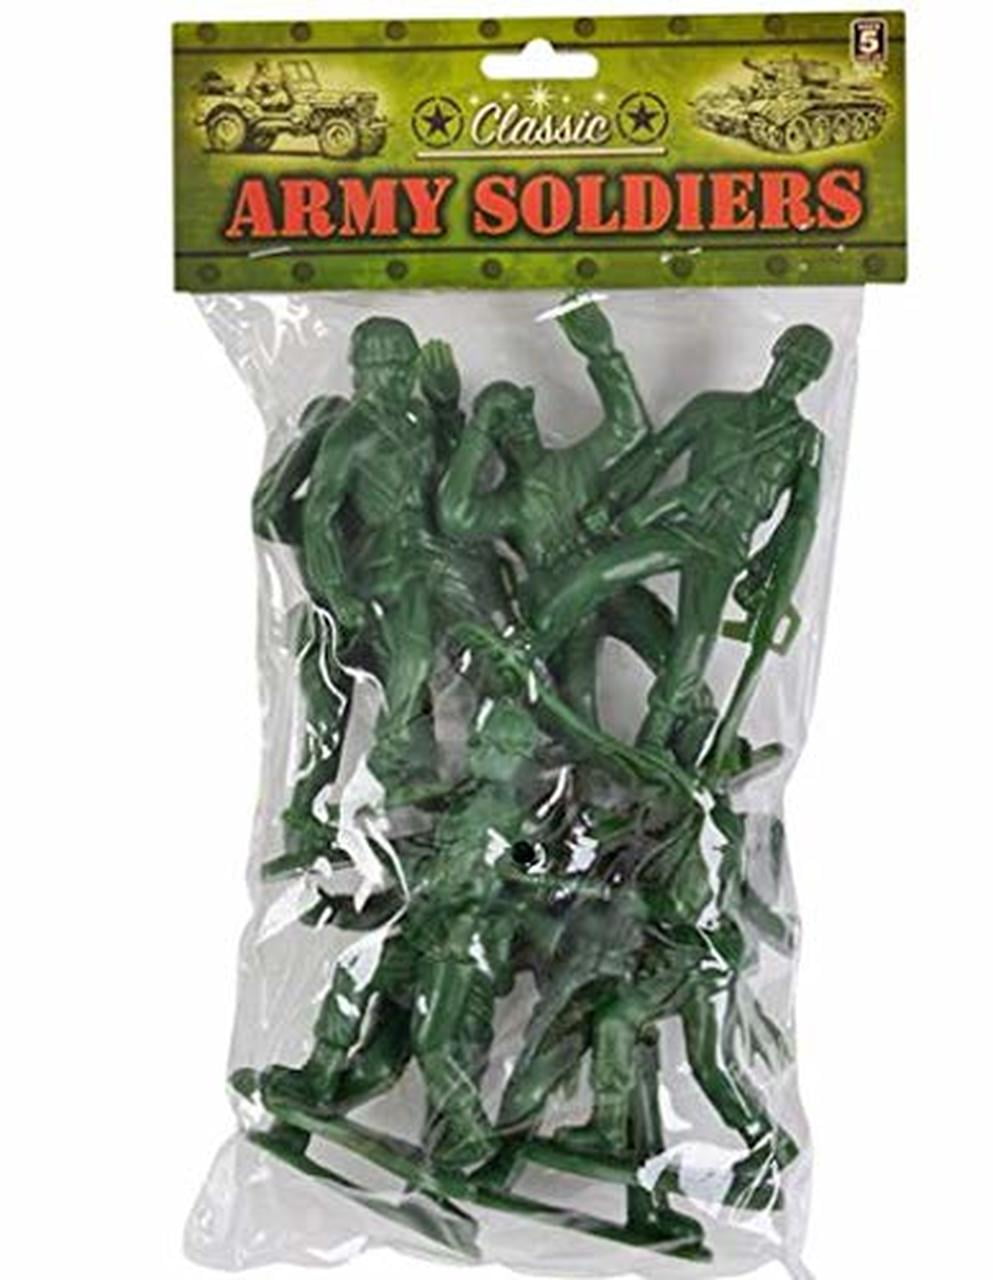 Lot of 100 Green Plastic Mini Army Men Bulk Action Figures Toys Soldiers 